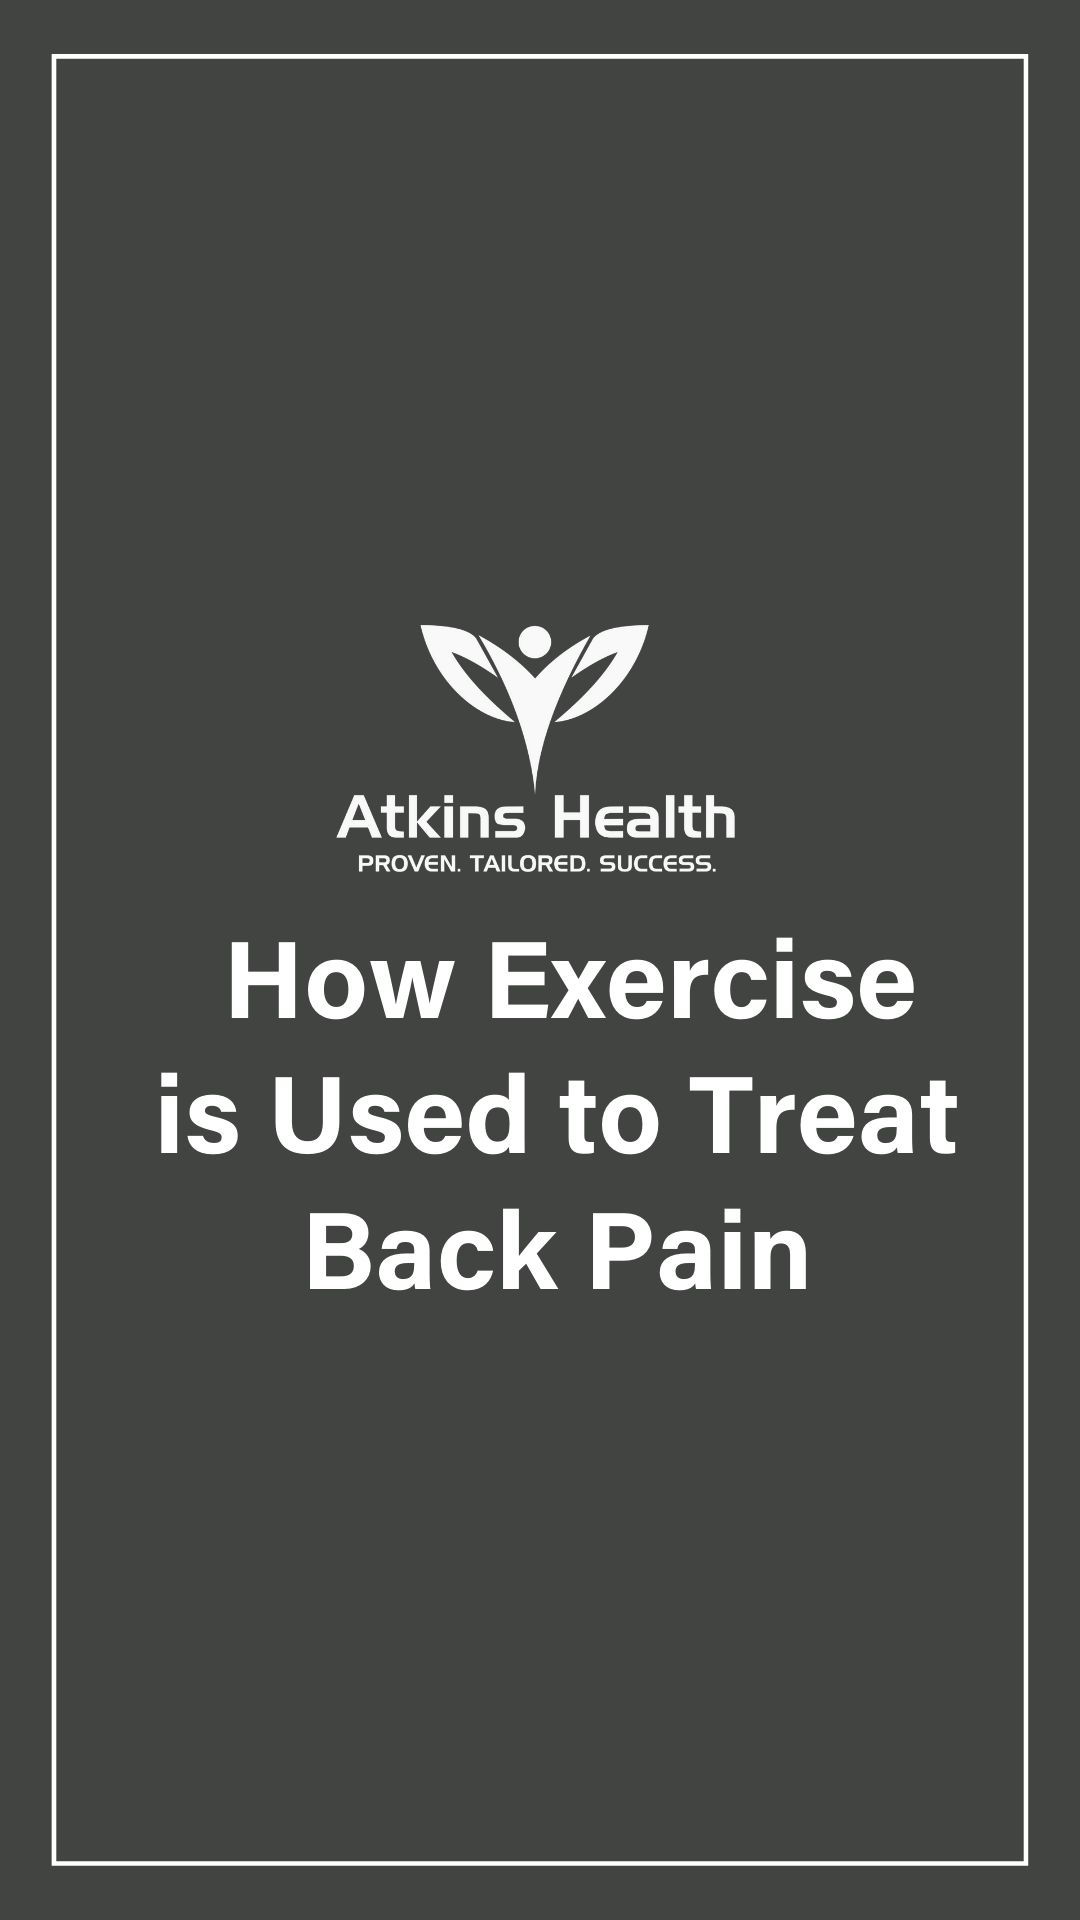 How-Exercise-is-Used-to-Treat-Back-Pain